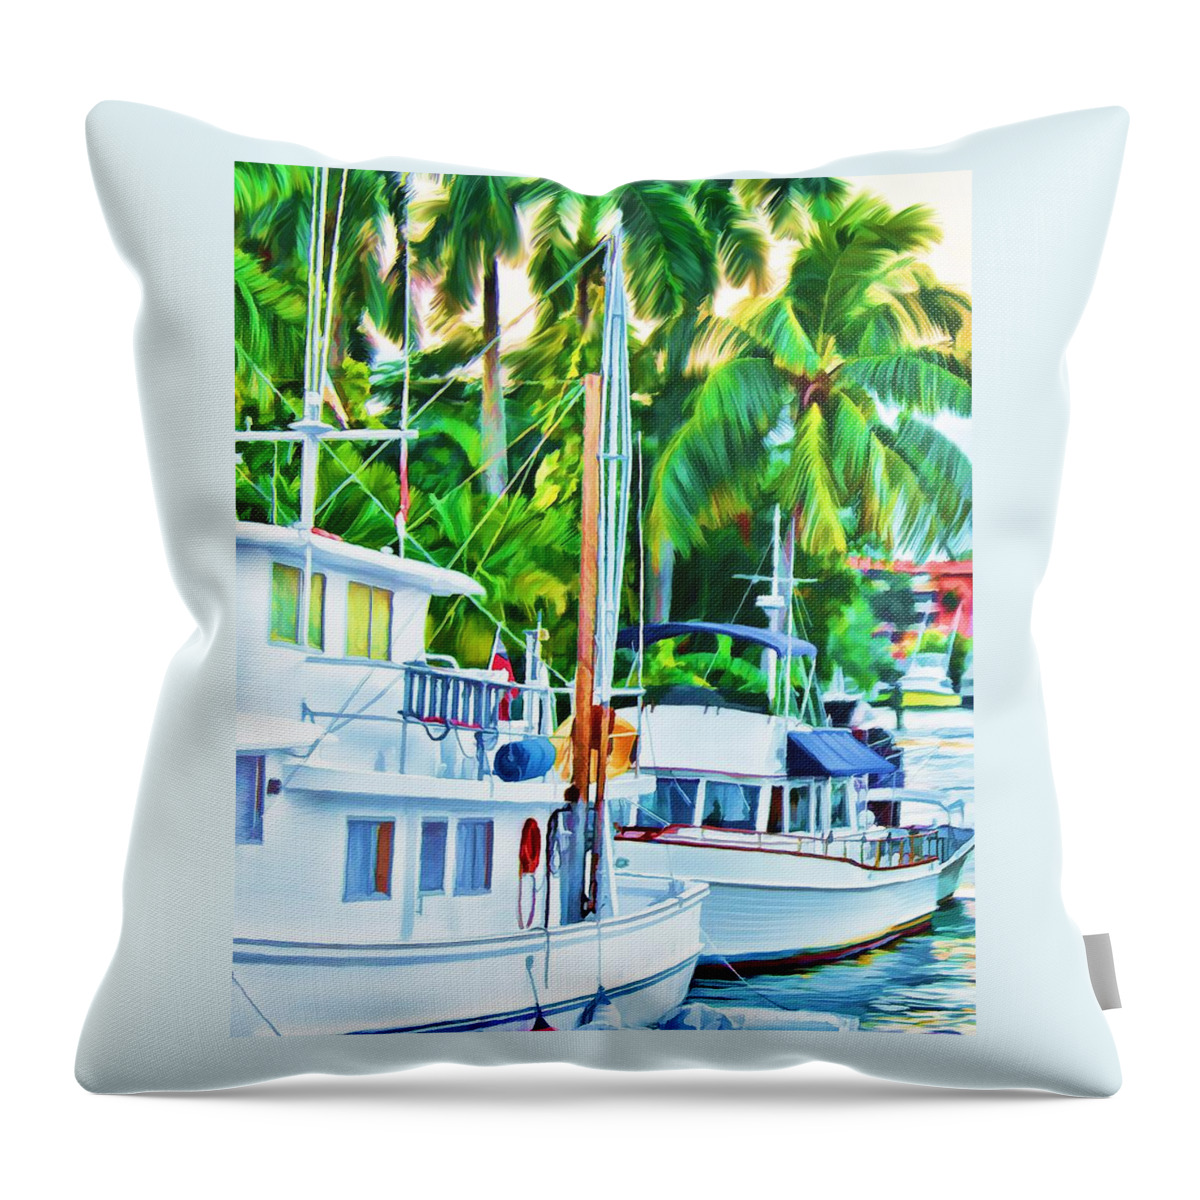 Boat Throw Pillow featuring the painting Two Boats by Deborah Boyd